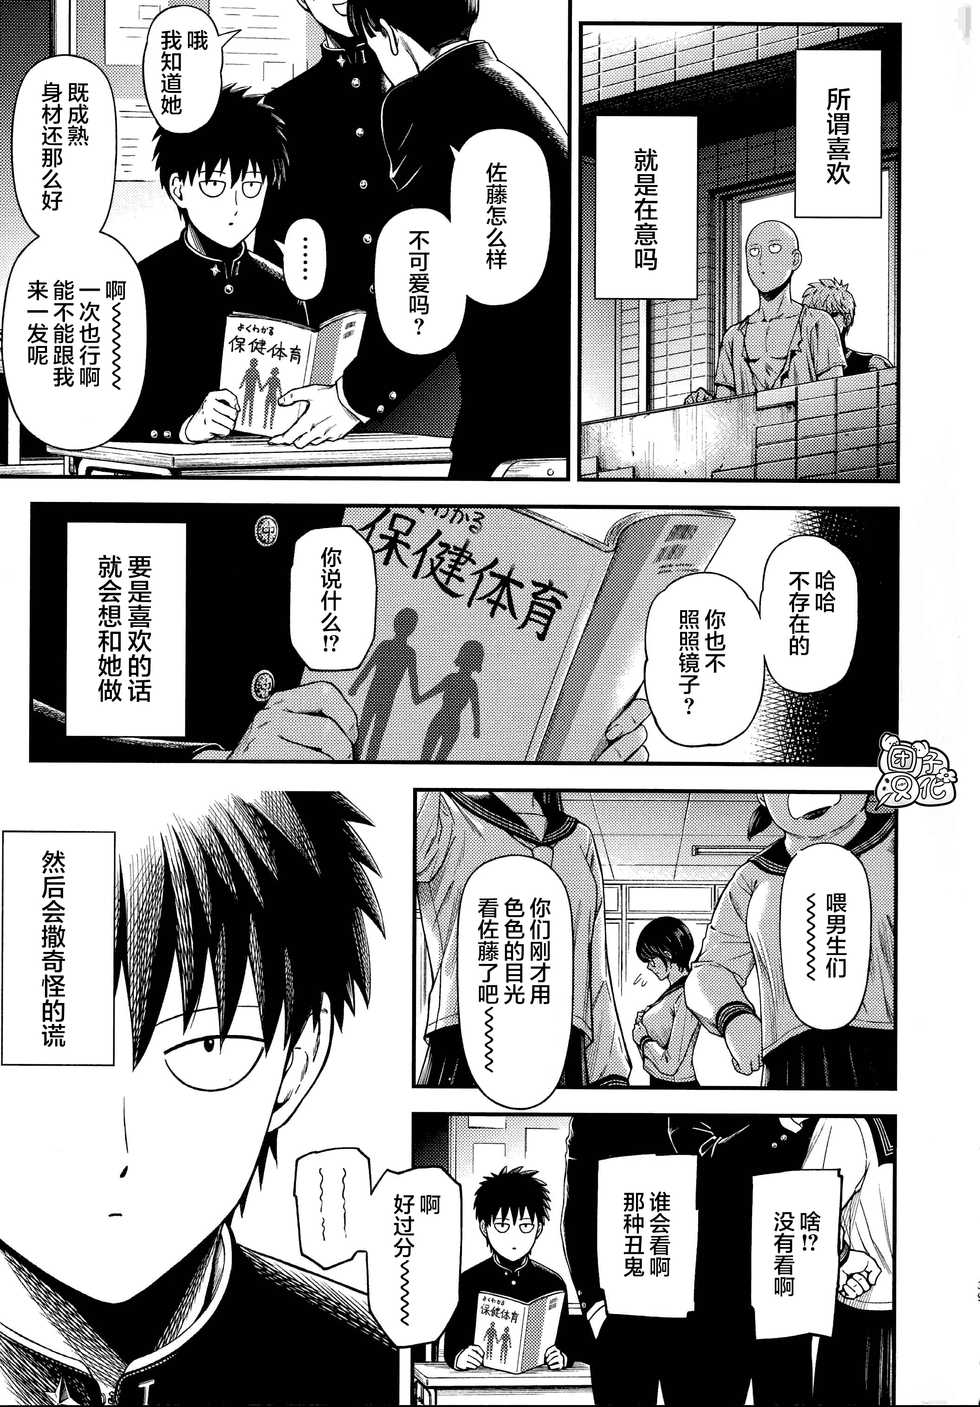 [Kiyosumi Hurricane (Kiyosumi Hurricane)] ONE-HURRICANE 6.5 (One Punch Man) [Chinese] [团子汉化组] - Page 40